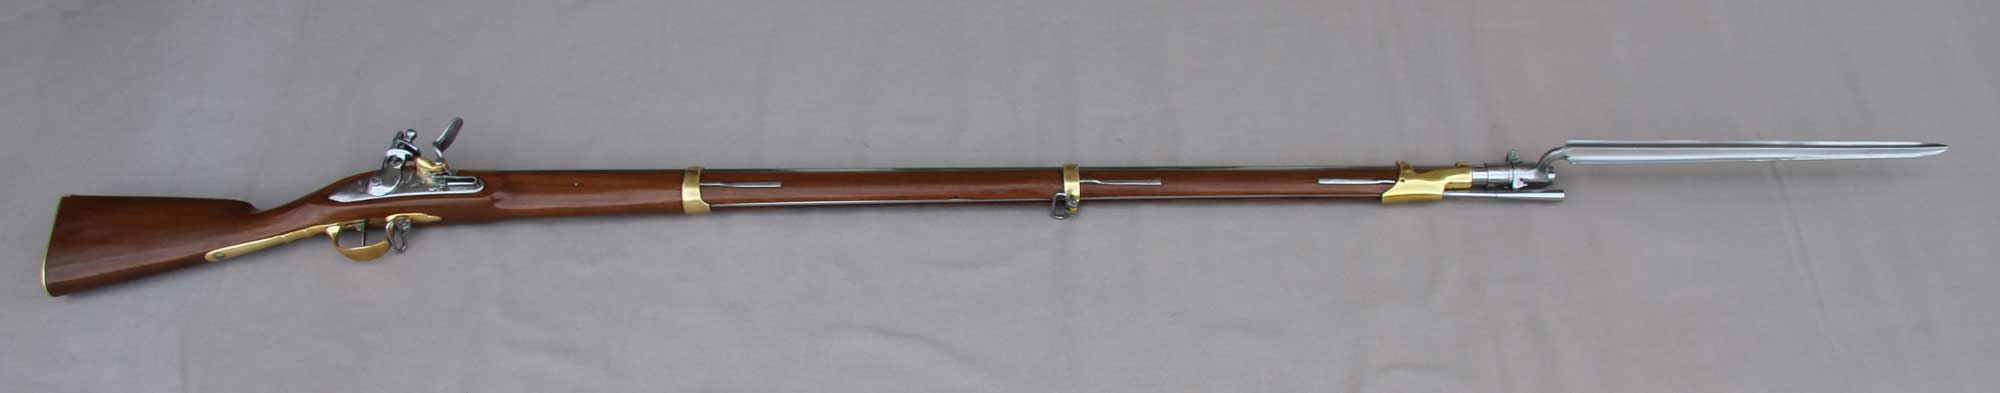 French 1777 Charleville musket (Garde Imperiale) - Click Image to Close